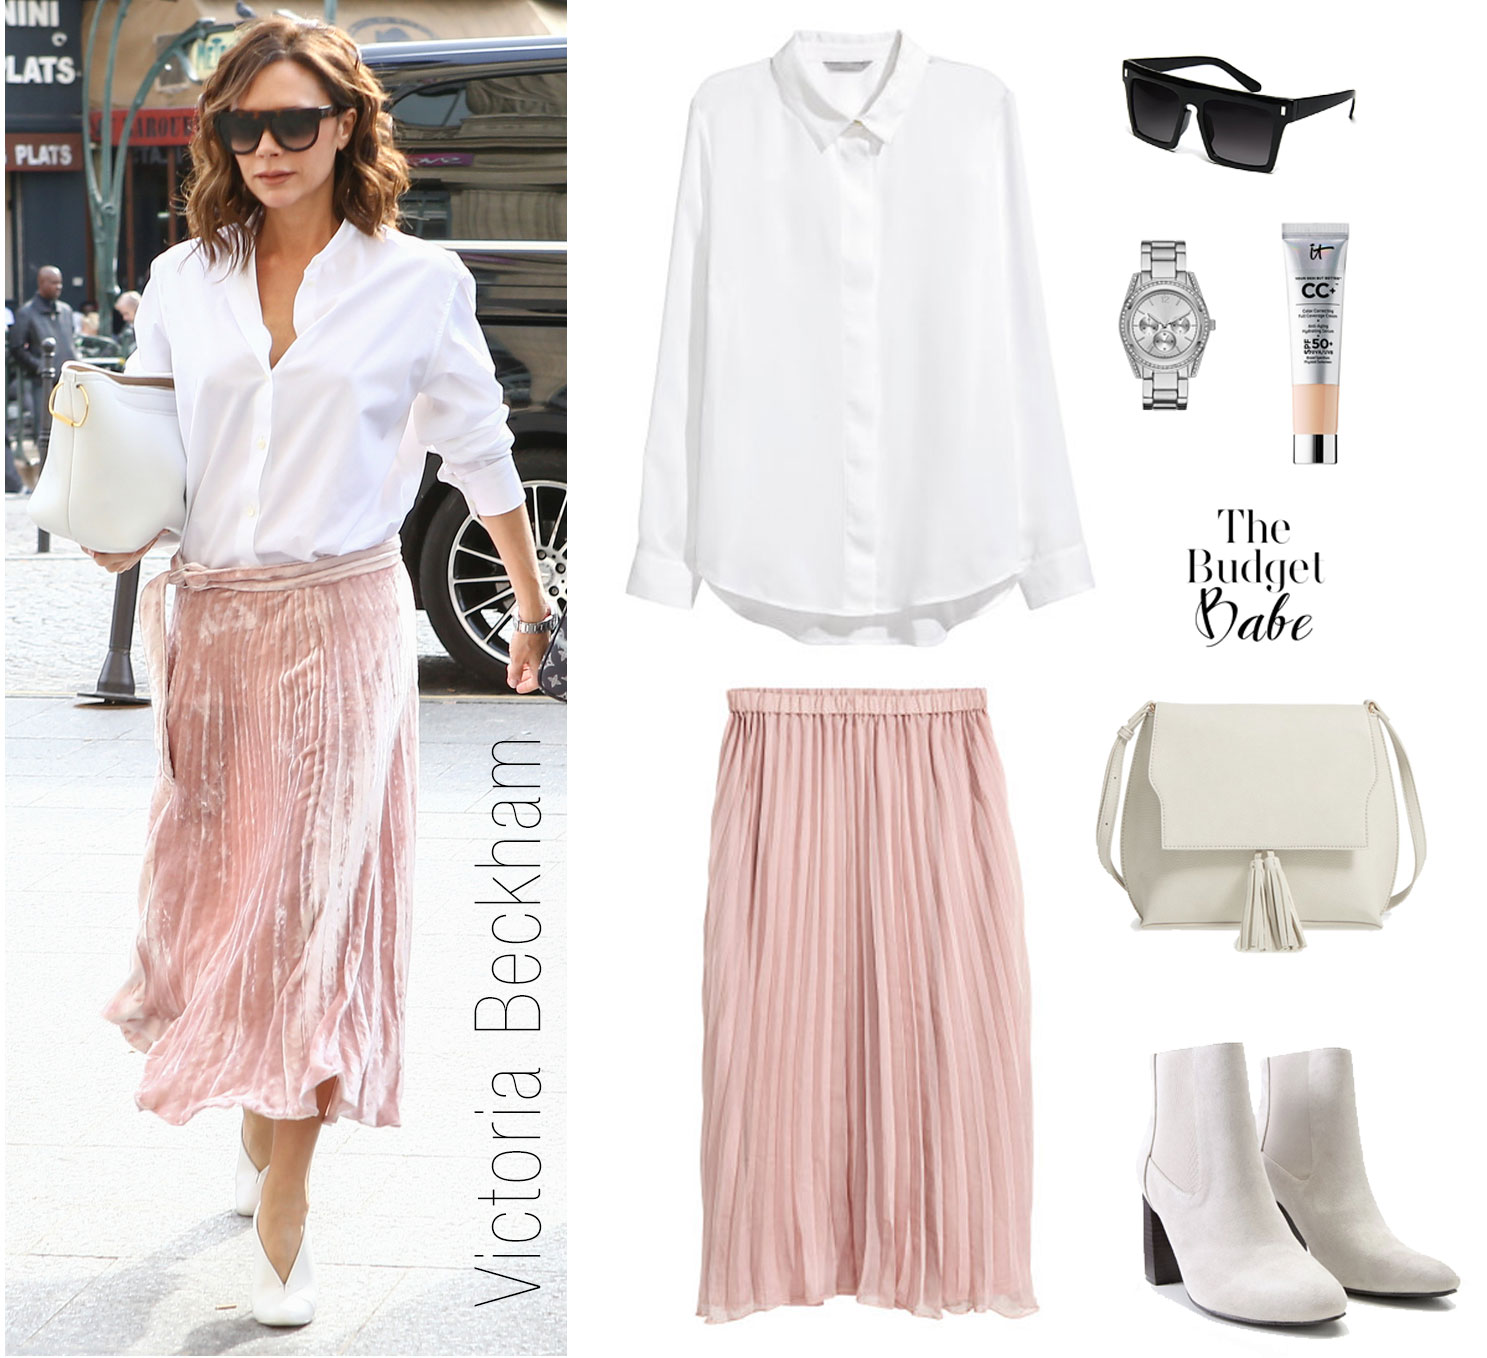 Victoria Beckham looks lovely in a pink pleated skirt and white blouse.